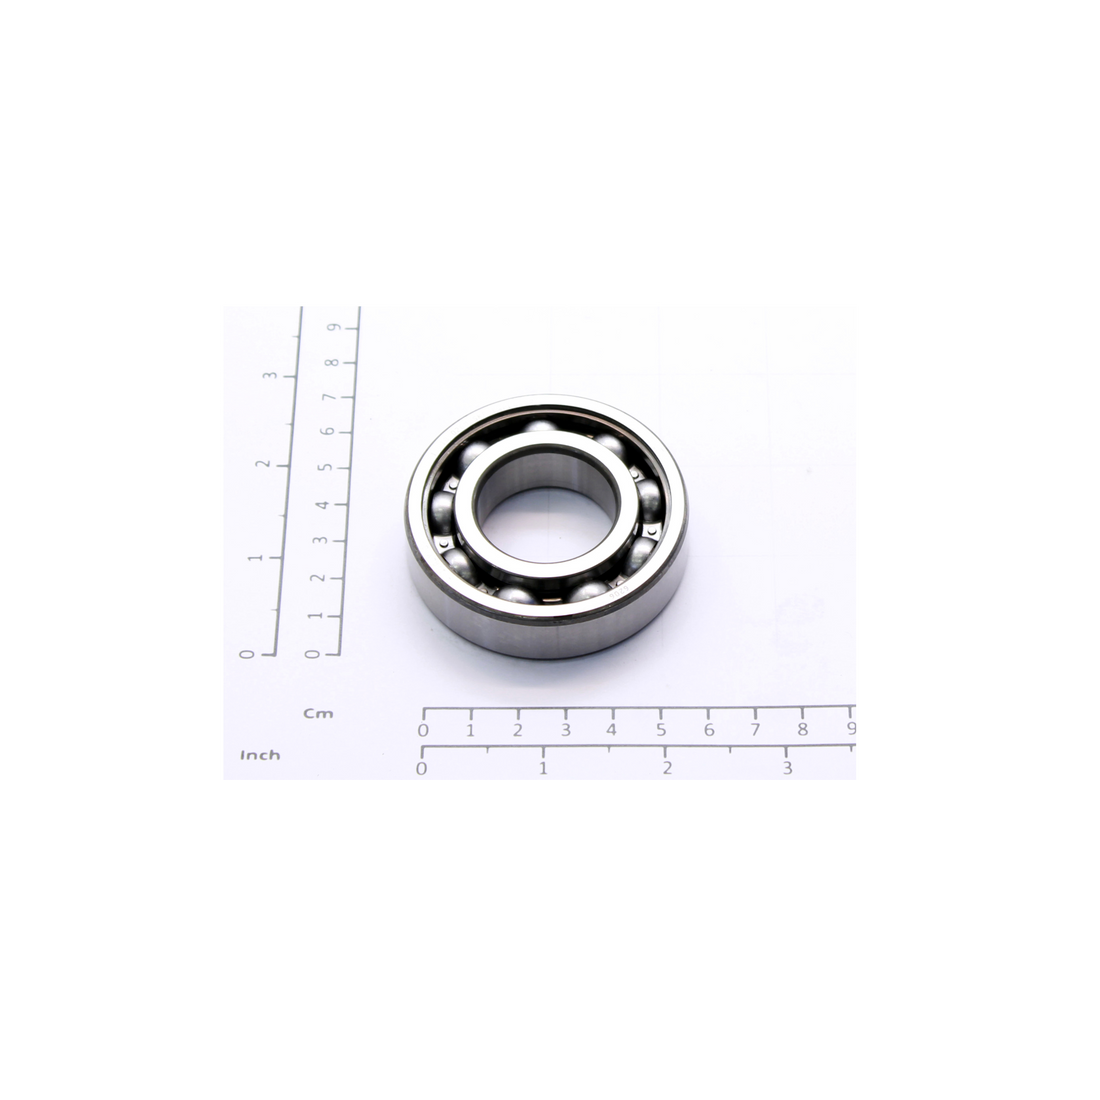 R&M Parts - Deep Groove Ball Bearing, Part Number: 50005003